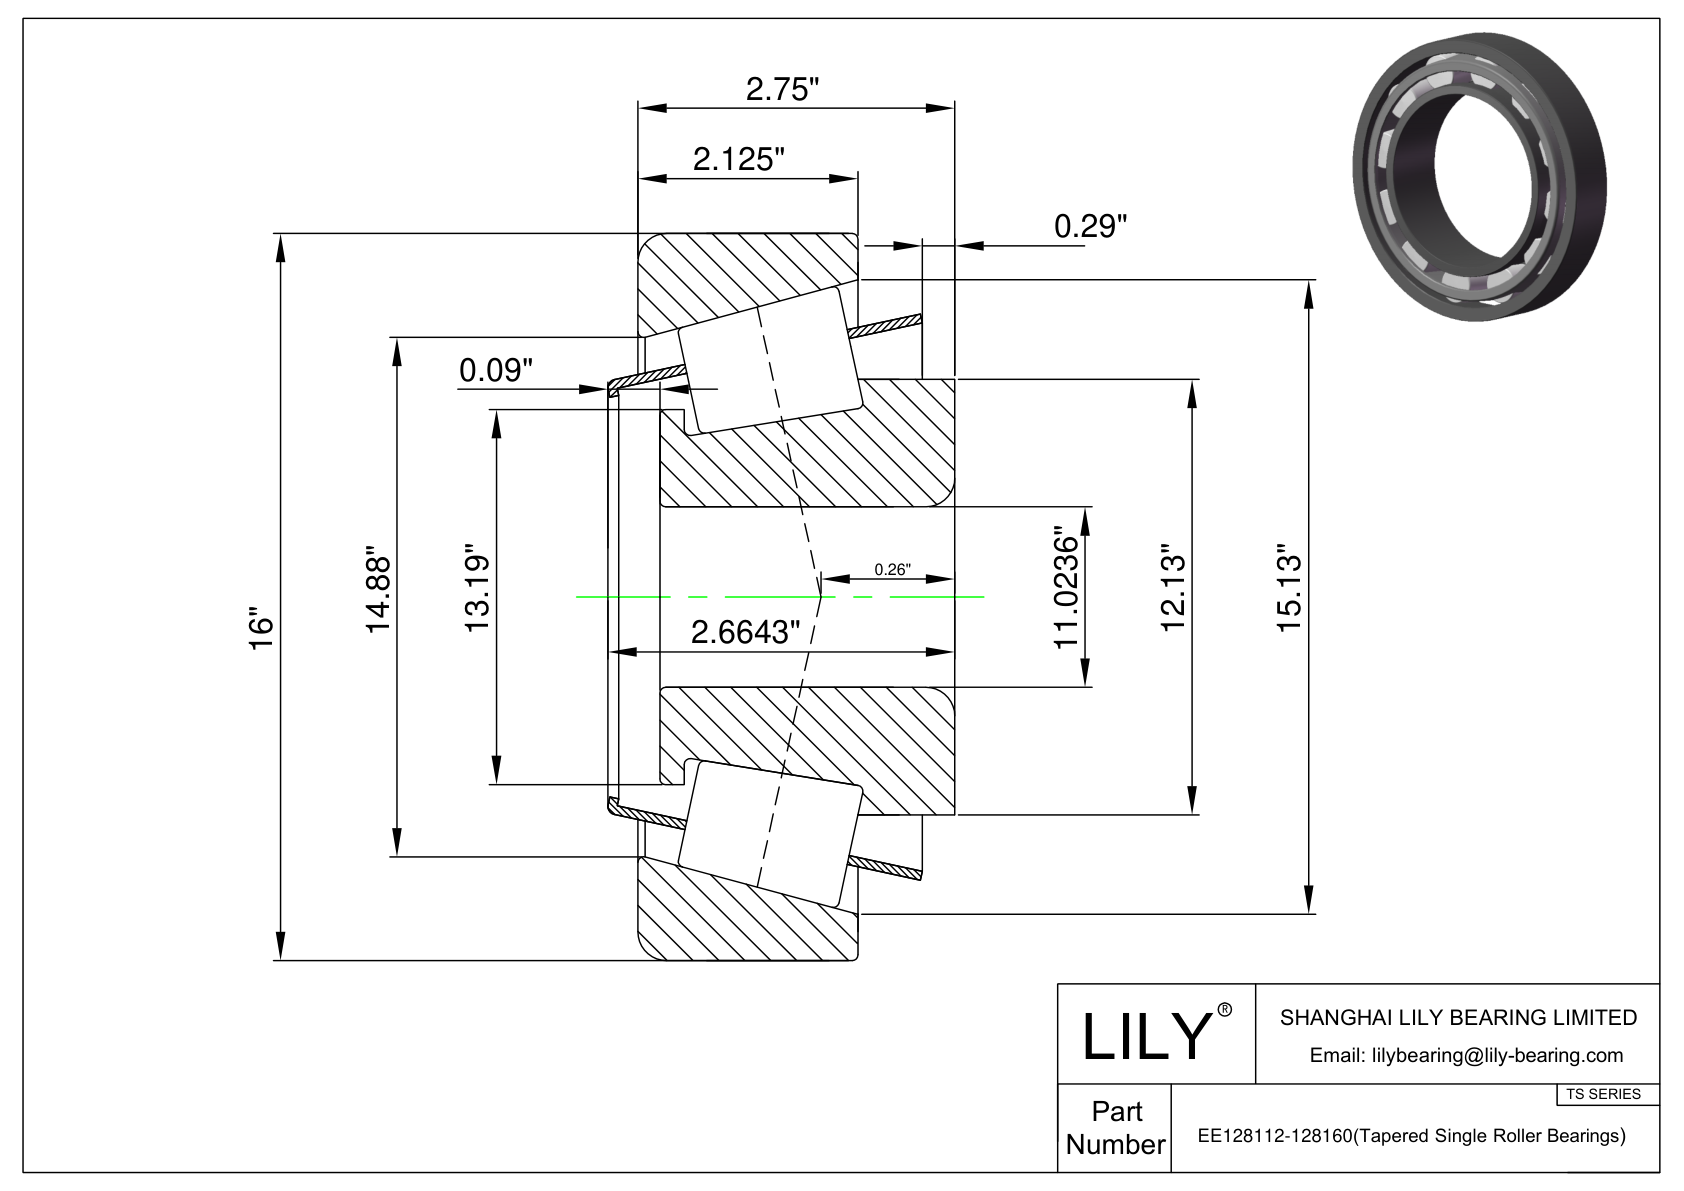 EE128112-128160 TS (Tapered Single Roller Bearings) (Imperial) cad drawing